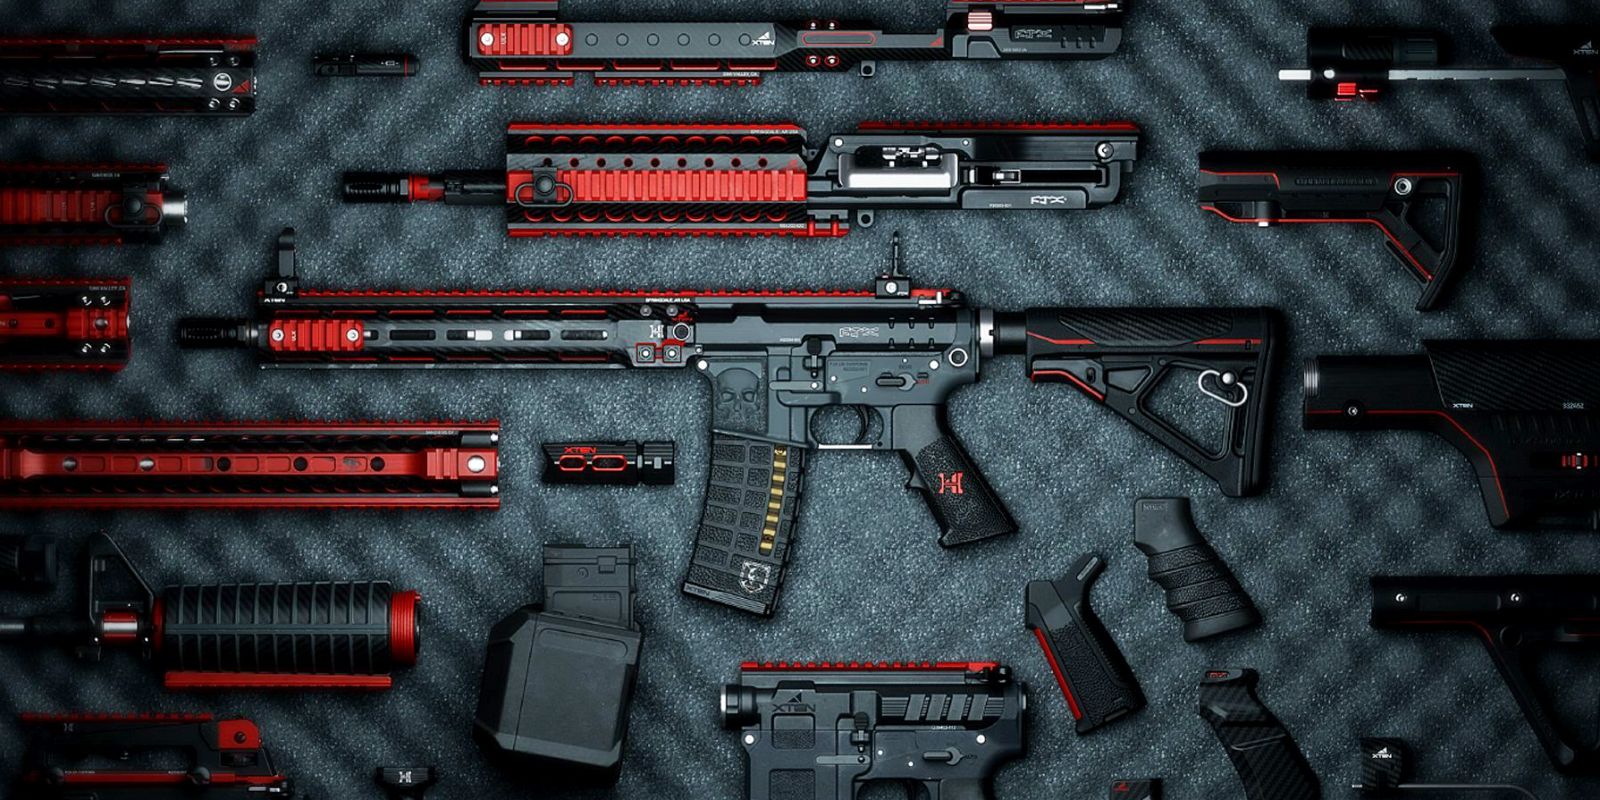 An M4 assault rifle from Modern Warfare 2, surrounded by all of its Gunsmith components, including grips, barrels, magazines, and stocks.